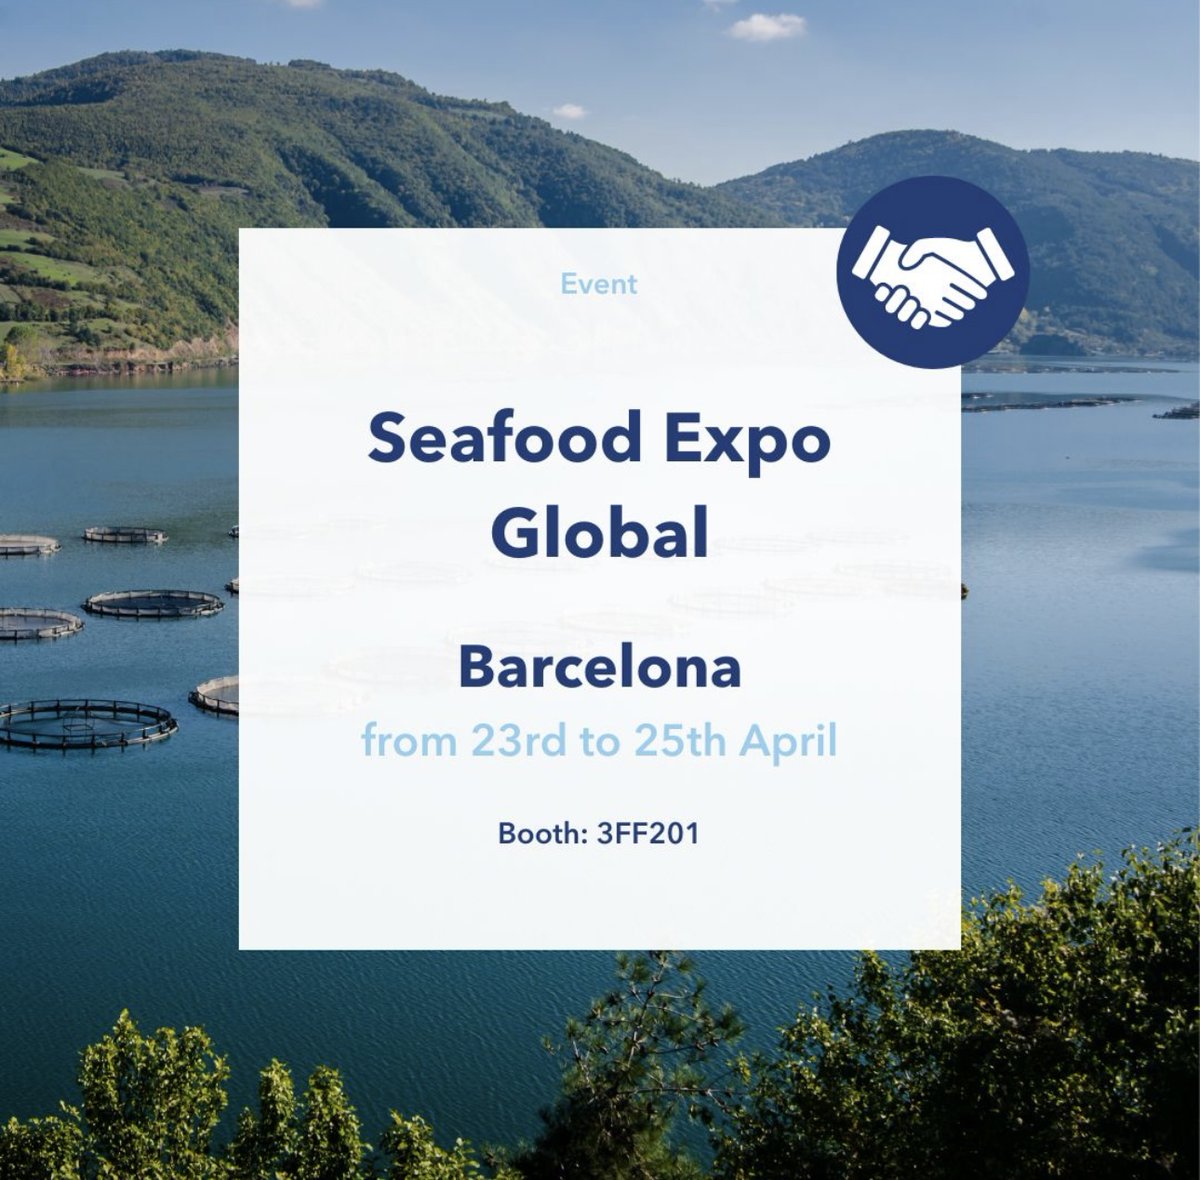 𝗝𝗼𝗶𝗻 𝘂𝘀 𝗶𝗻 𝗕𝗮𝗿𝗰𝗲𝗹𝗼𝗻𝗮! 🌊🇪🇸 This week we are at Seafood Expo Global in Barcelona! 🐟🐟 We will be exhibiting from Tuesday to Thursday at the Danish Export Association Pavillon in booth 3FF201 #Aquaculture #SeaFood #SeafoodExpoGlobal #SeafoodExpoGlobal2024